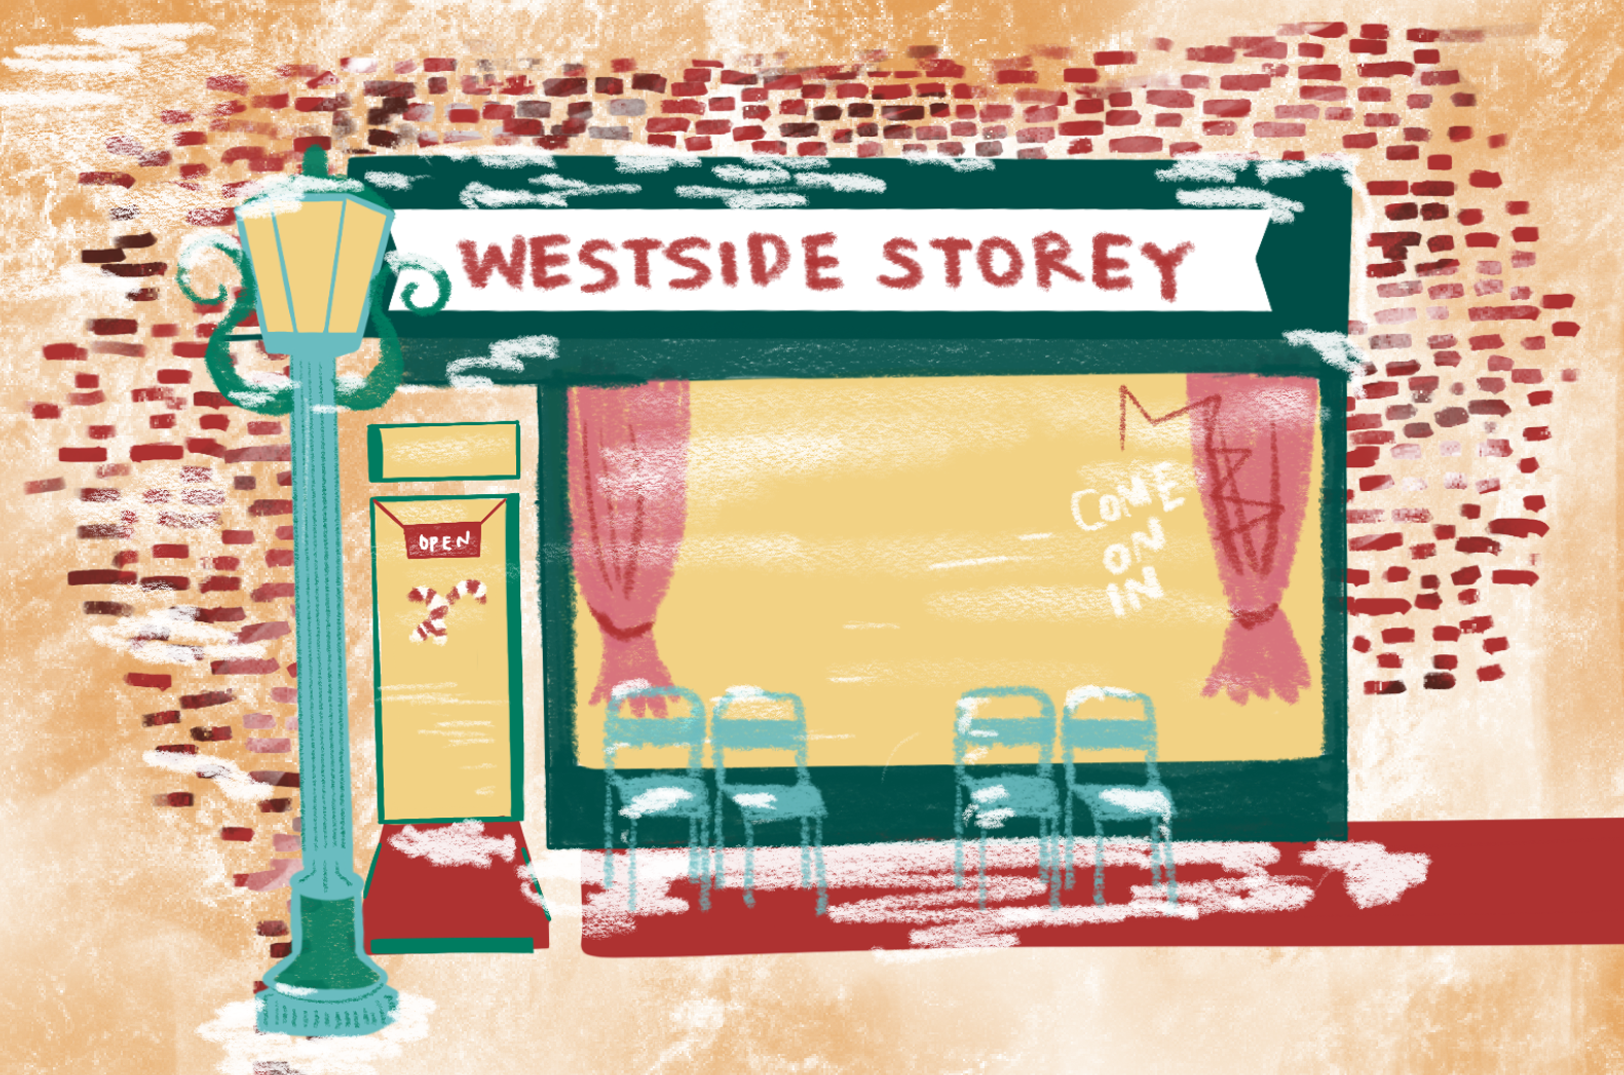 Shop small: Five ways to wear (and wash with) KC pride from Westside Storey's historic corner